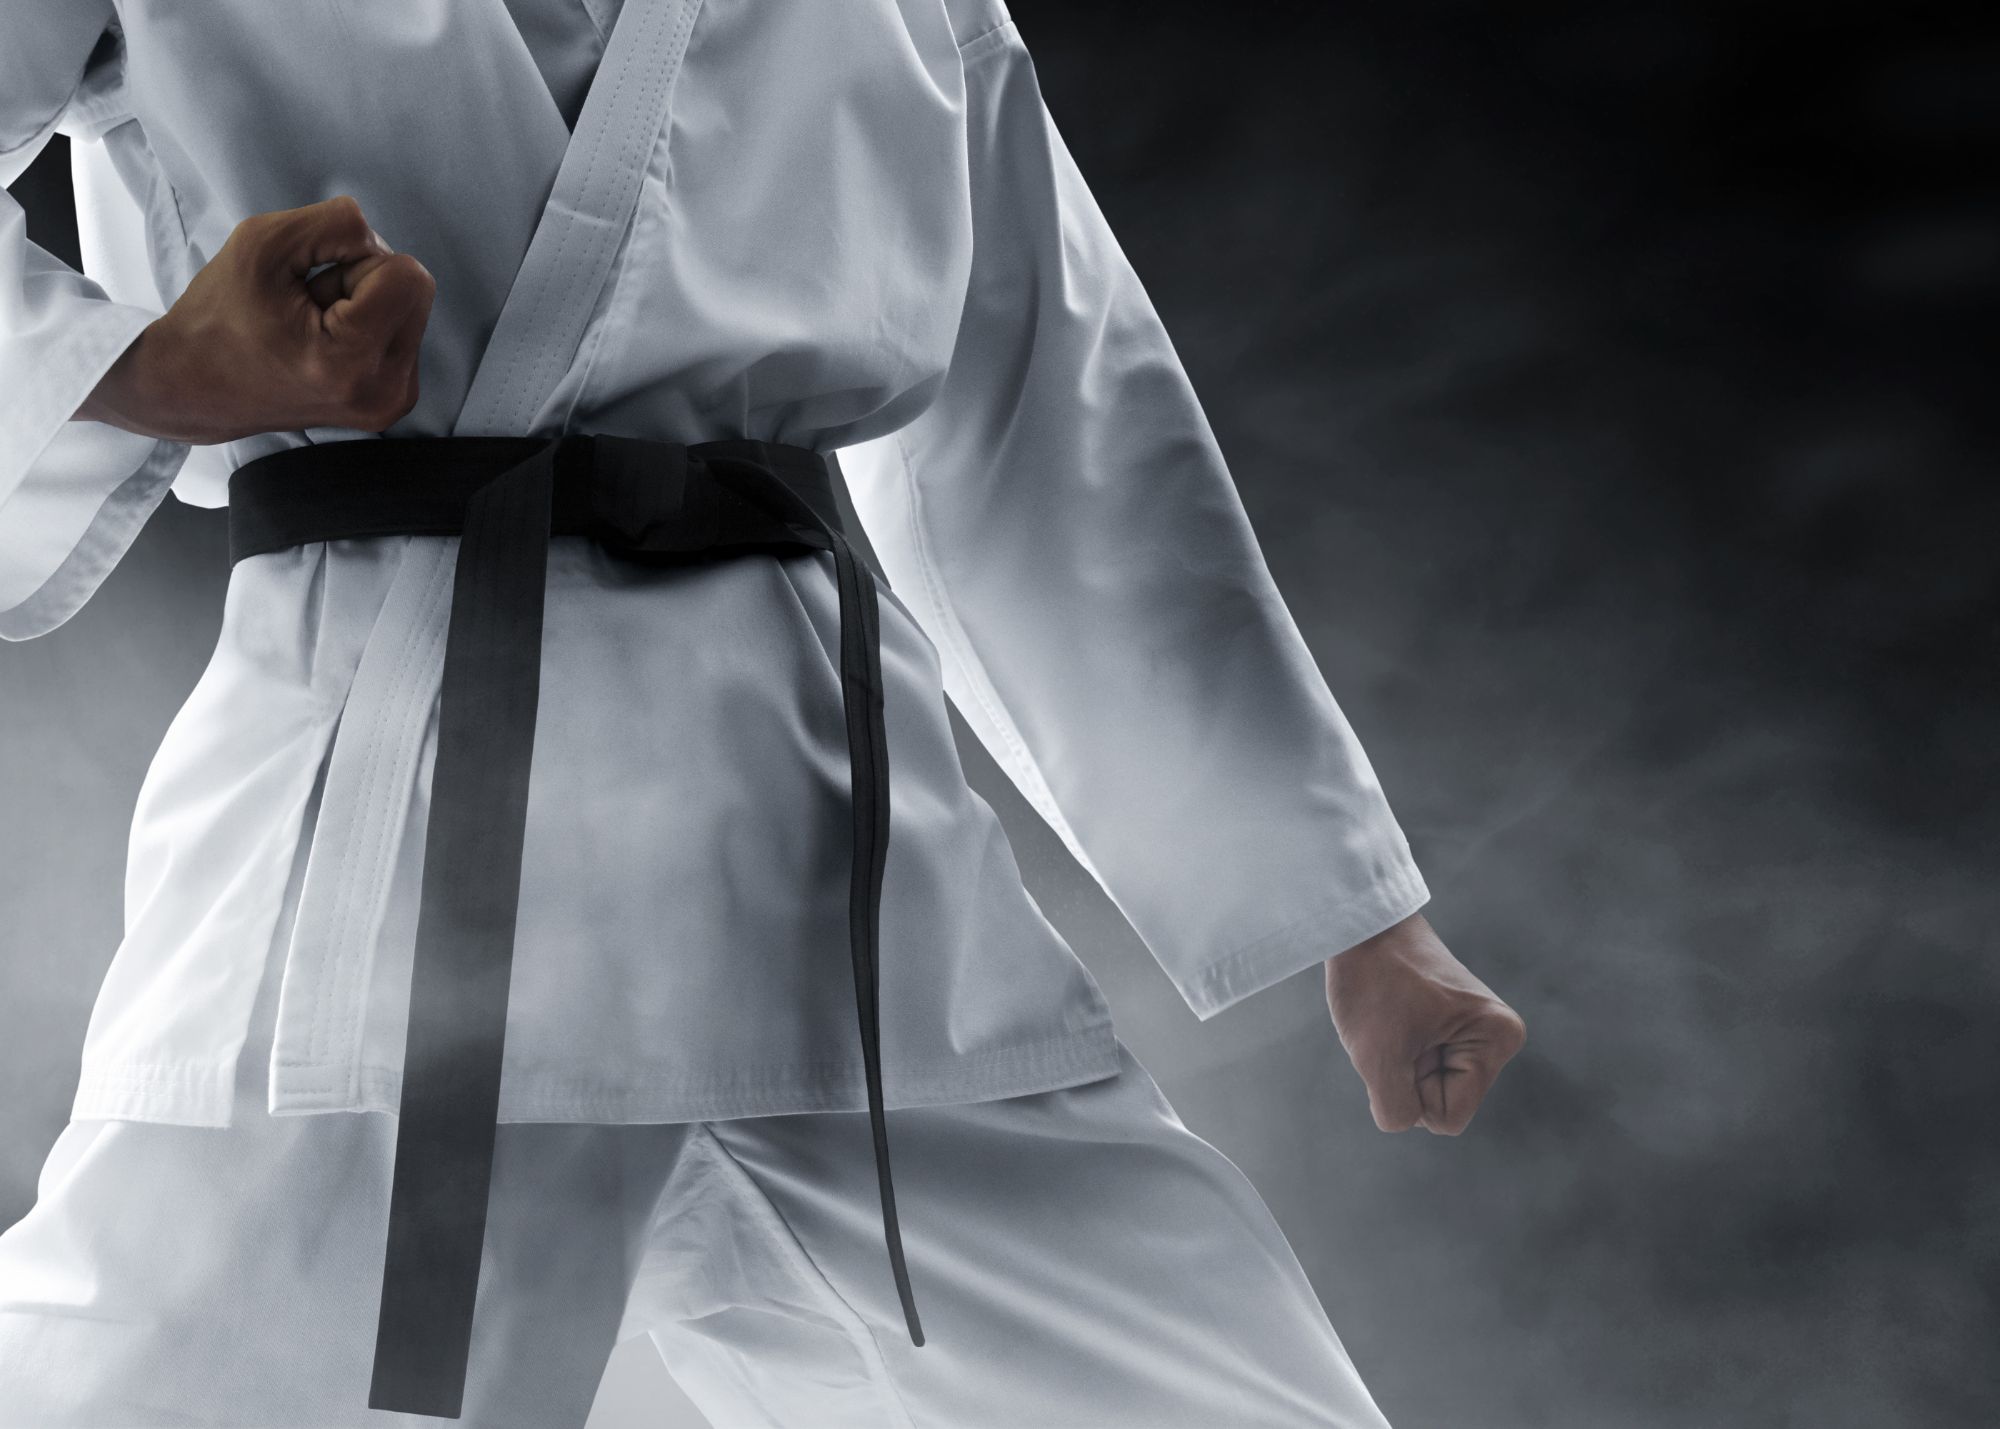 This image depicts a person wearing martial arts clothing and posing in a self defense pose..